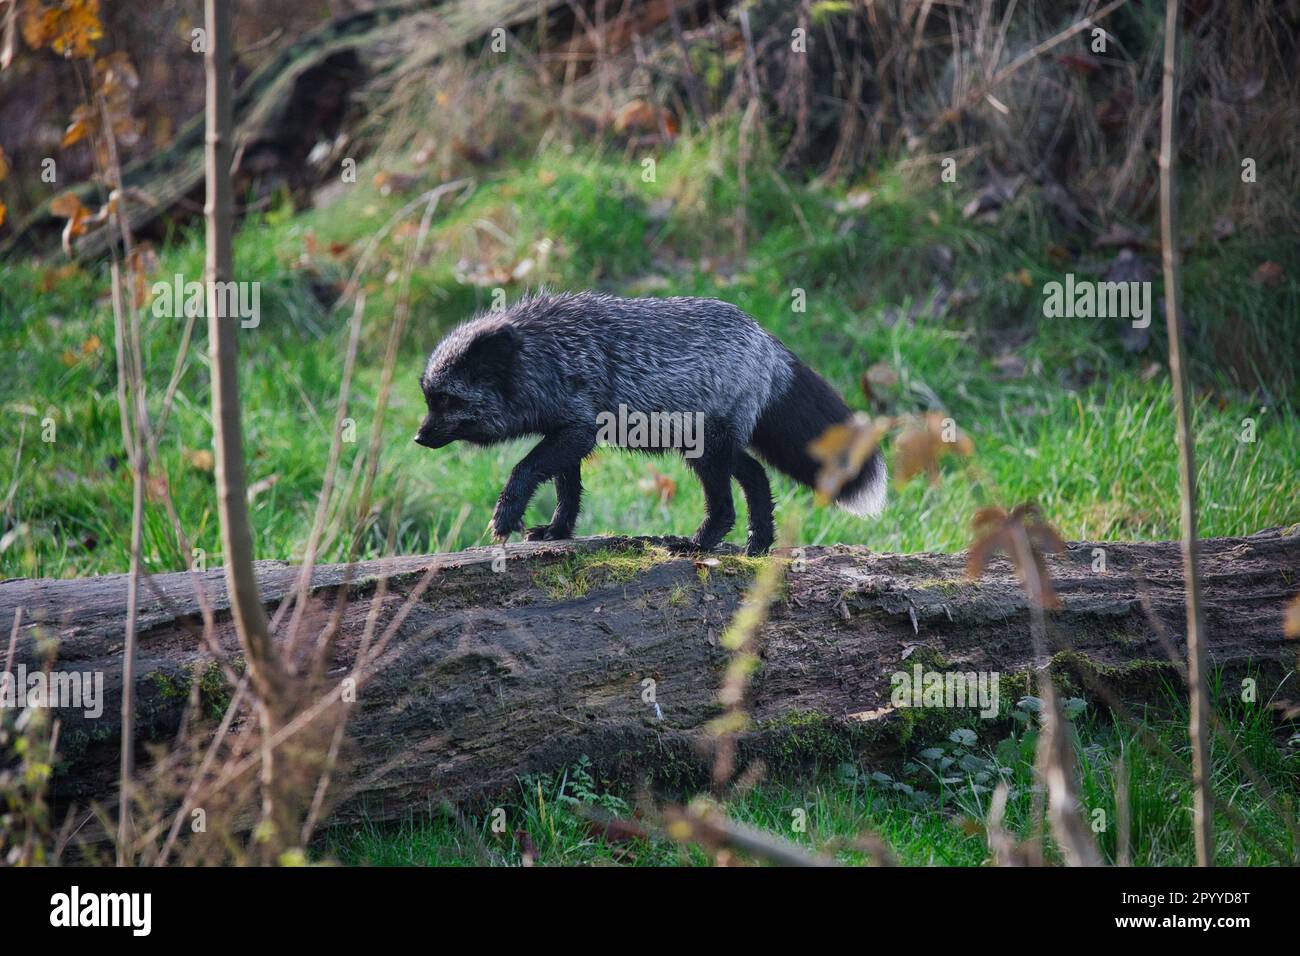 A cute grey fox is captured jumping over a log in a rural meadow, surrounded by lush green grass Stock Photo